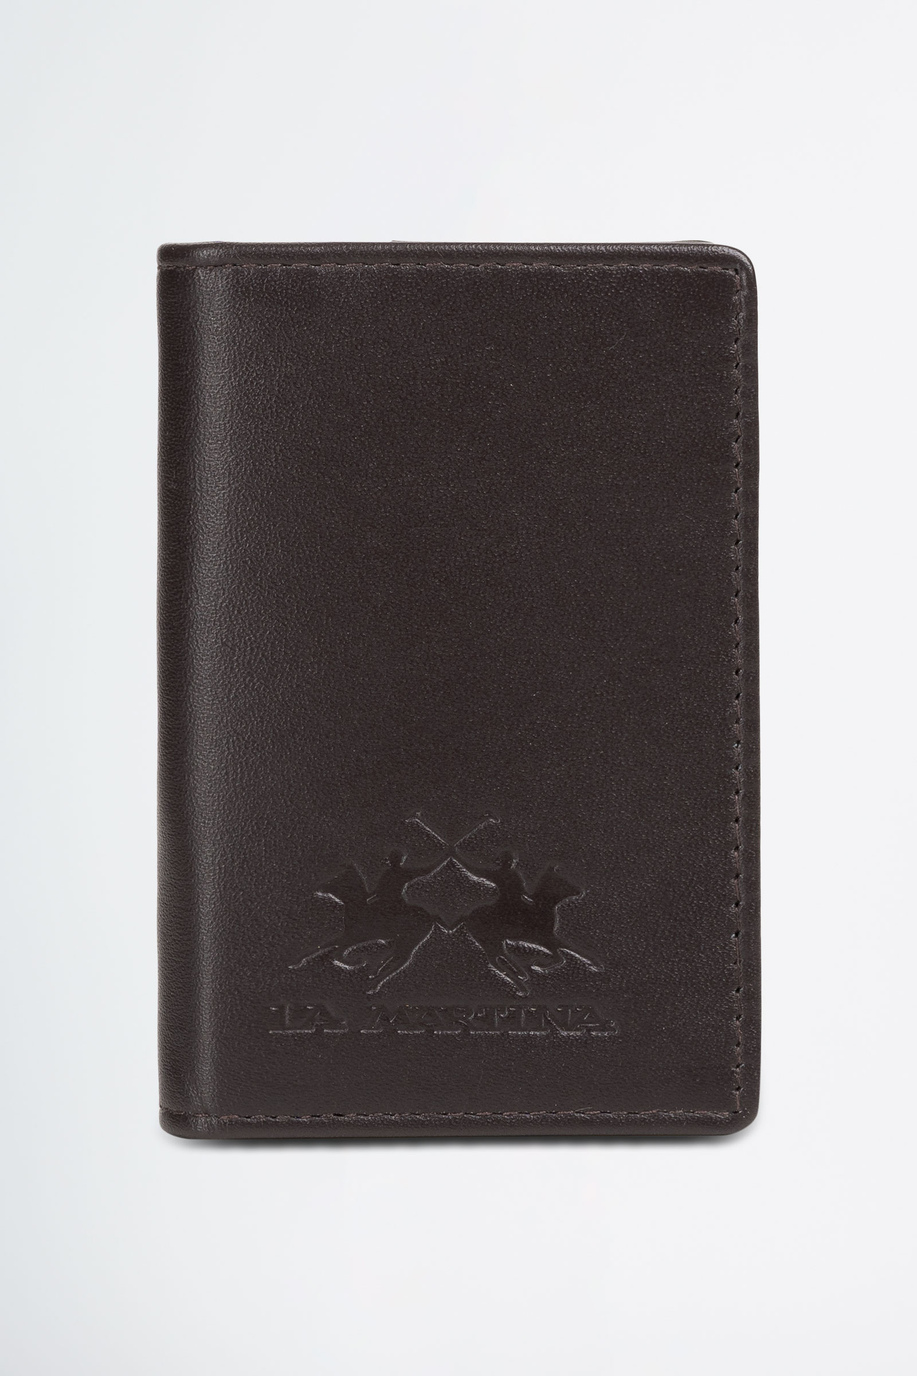 Leather ticket holder - Wallets and key chains | La Martina - Official Online Shop